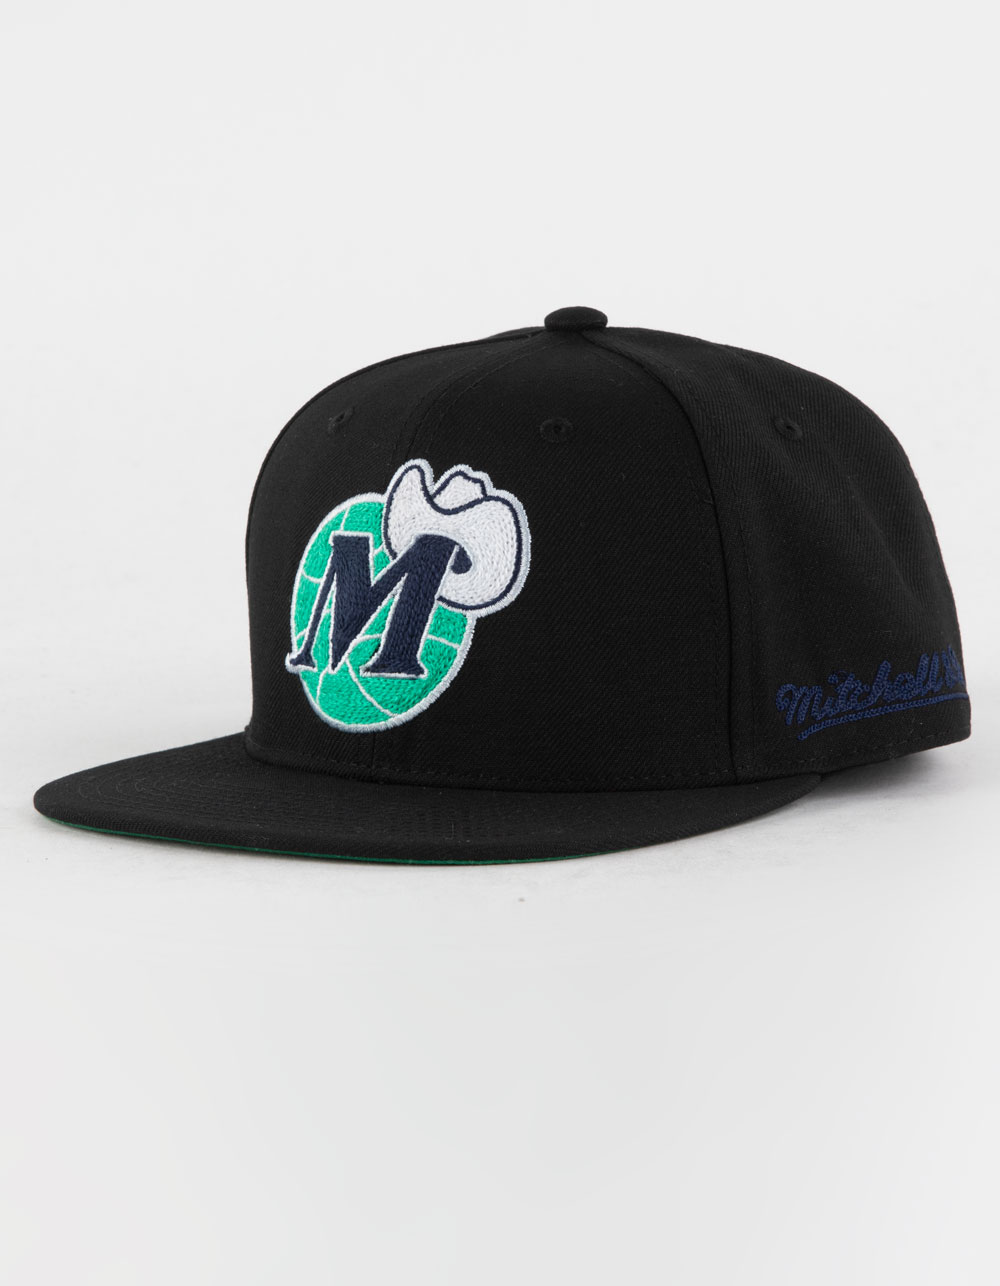 mitchell and ness fitted hats